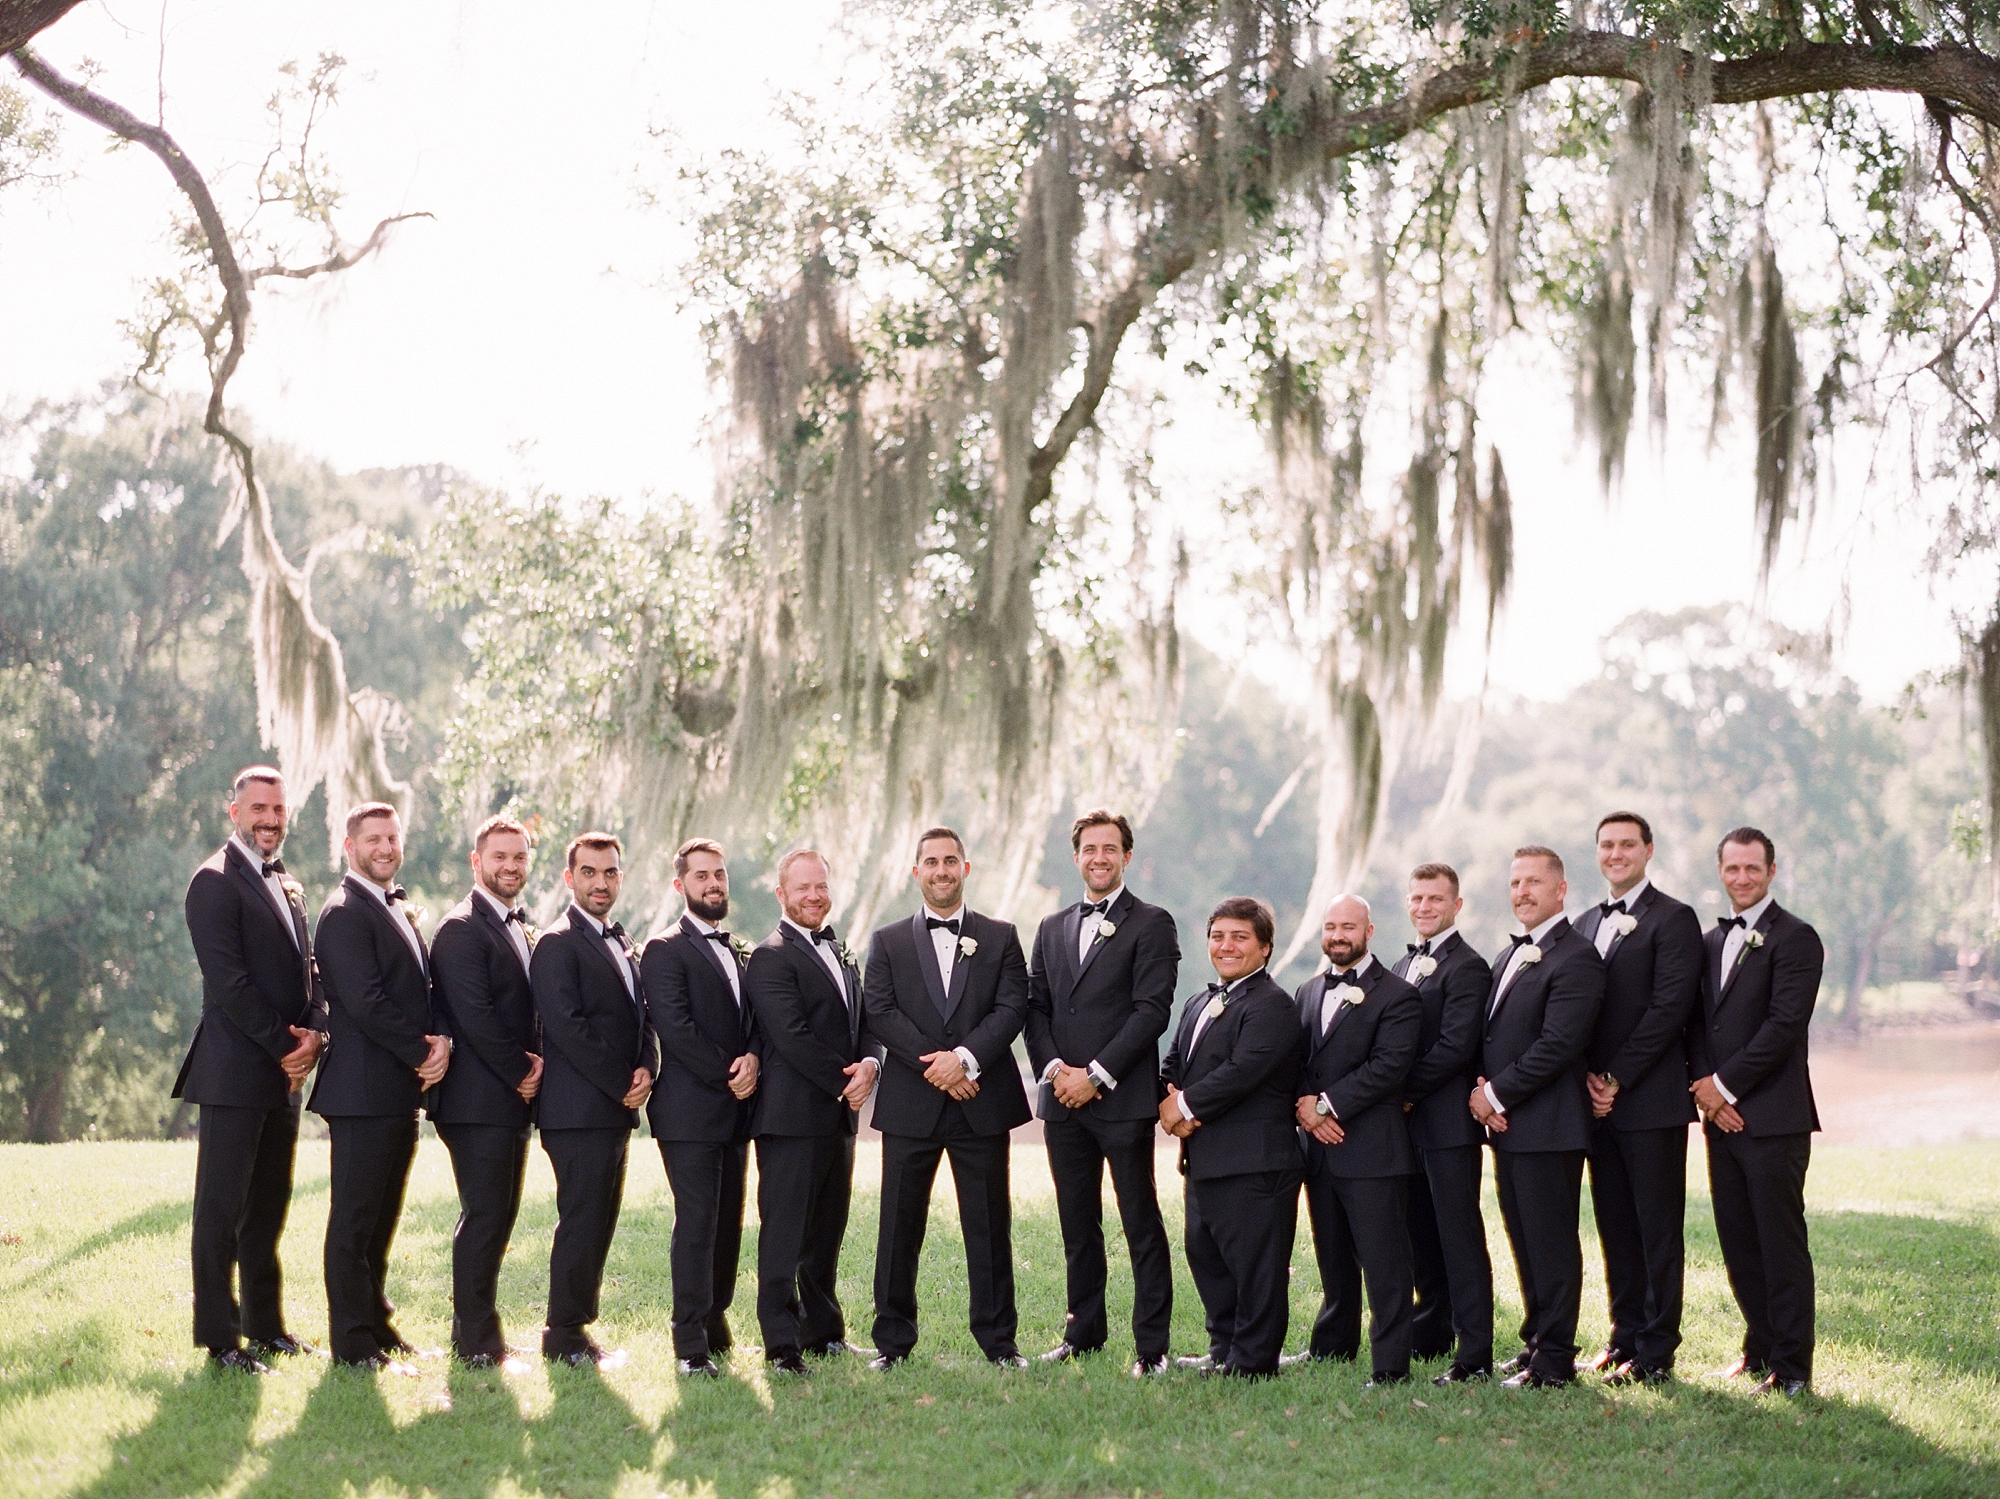 groom stands with groomsmen in black suits under tree with Spanish moss at the University of Louisiana at Lafayette alumni center